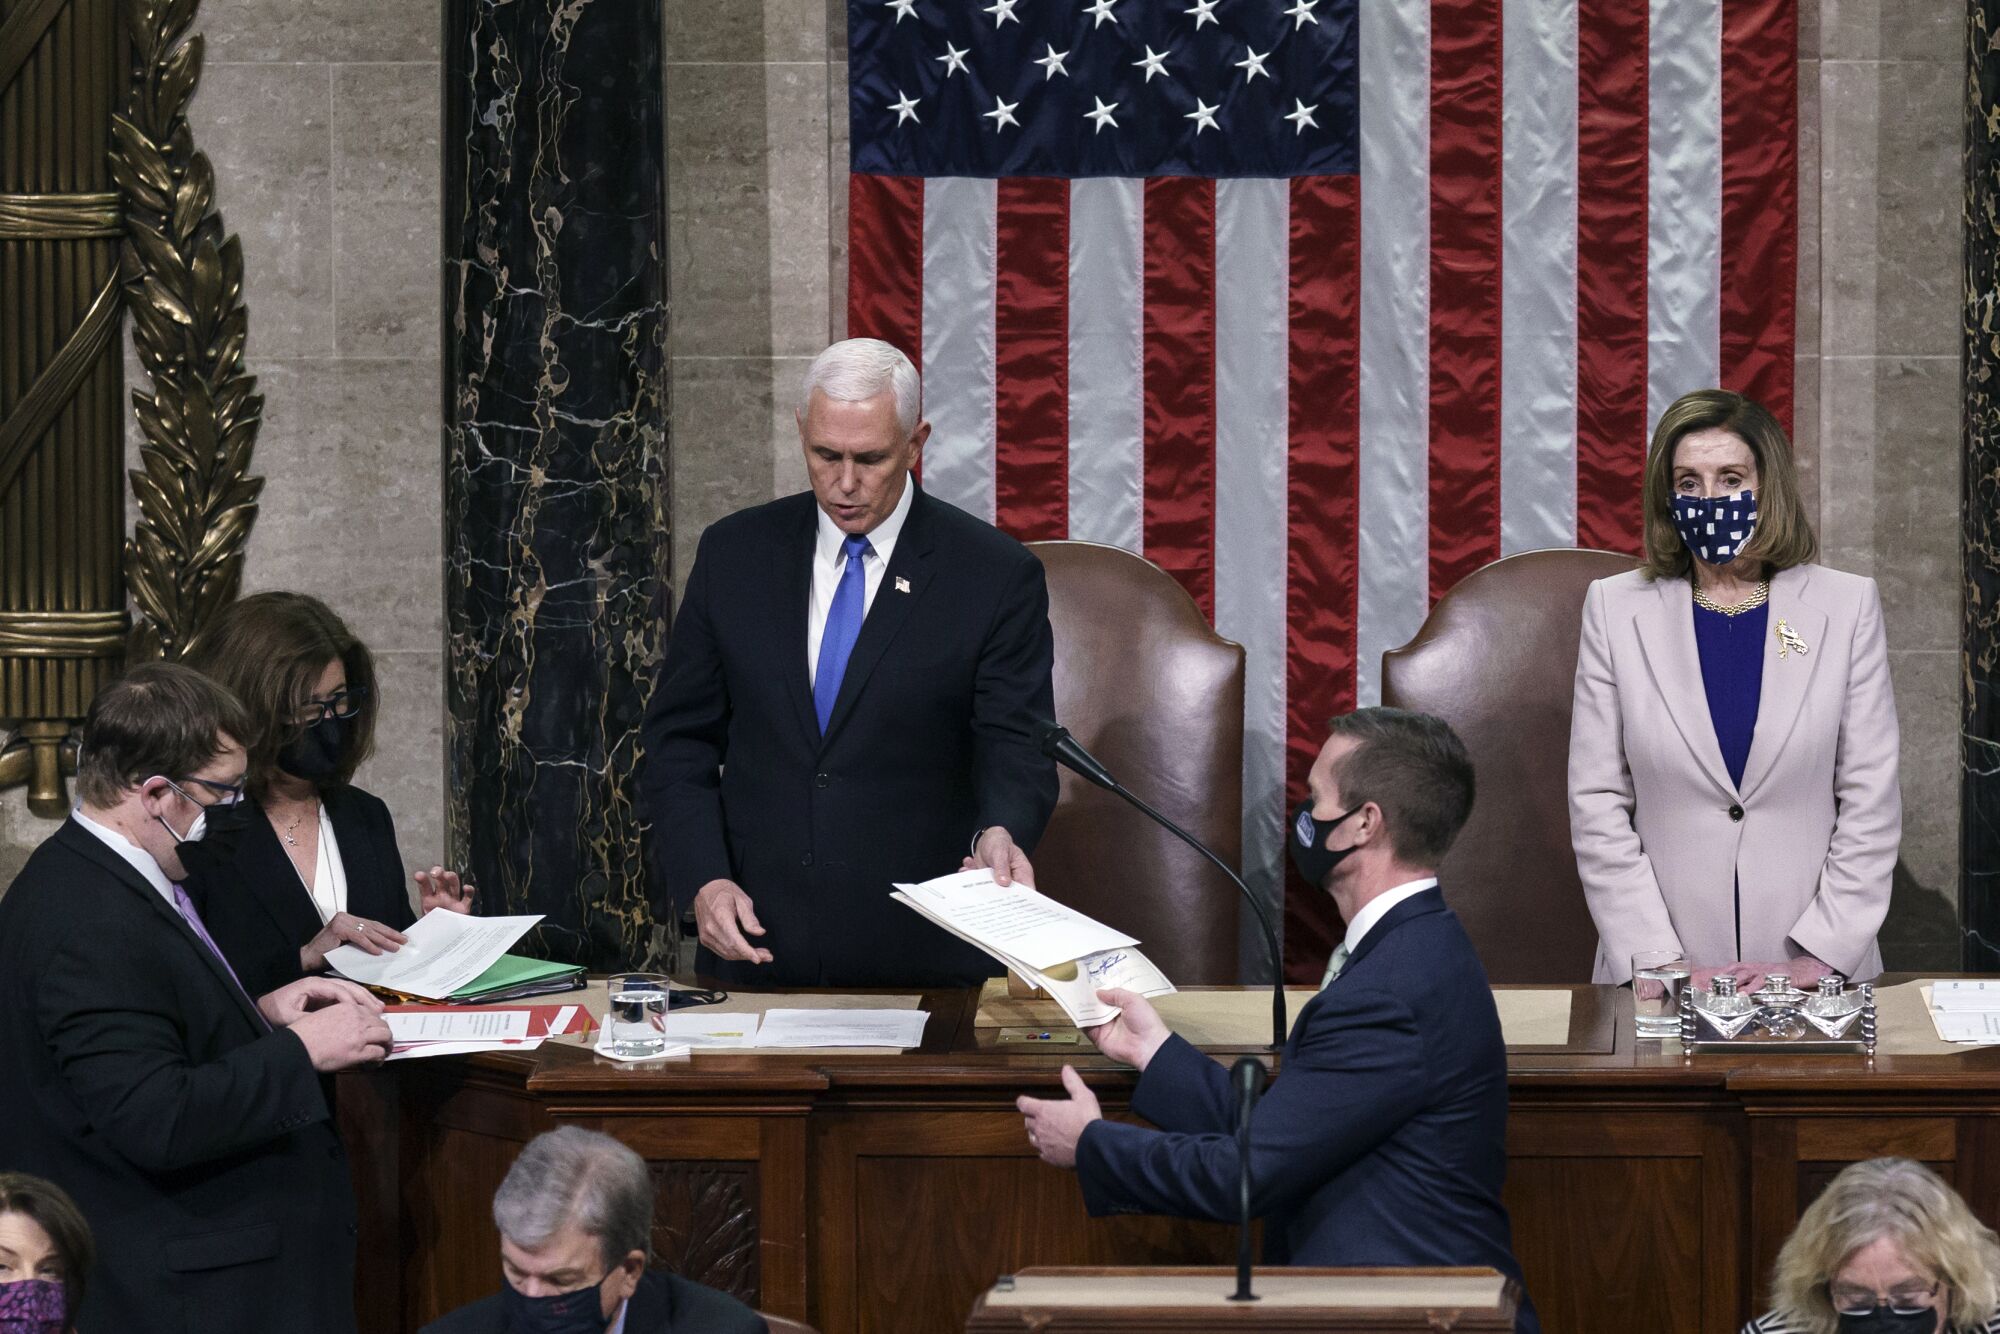 Vice President Mike Pence and House Speaker Nancy Pelosi in a joint session of Congress to certify the election.